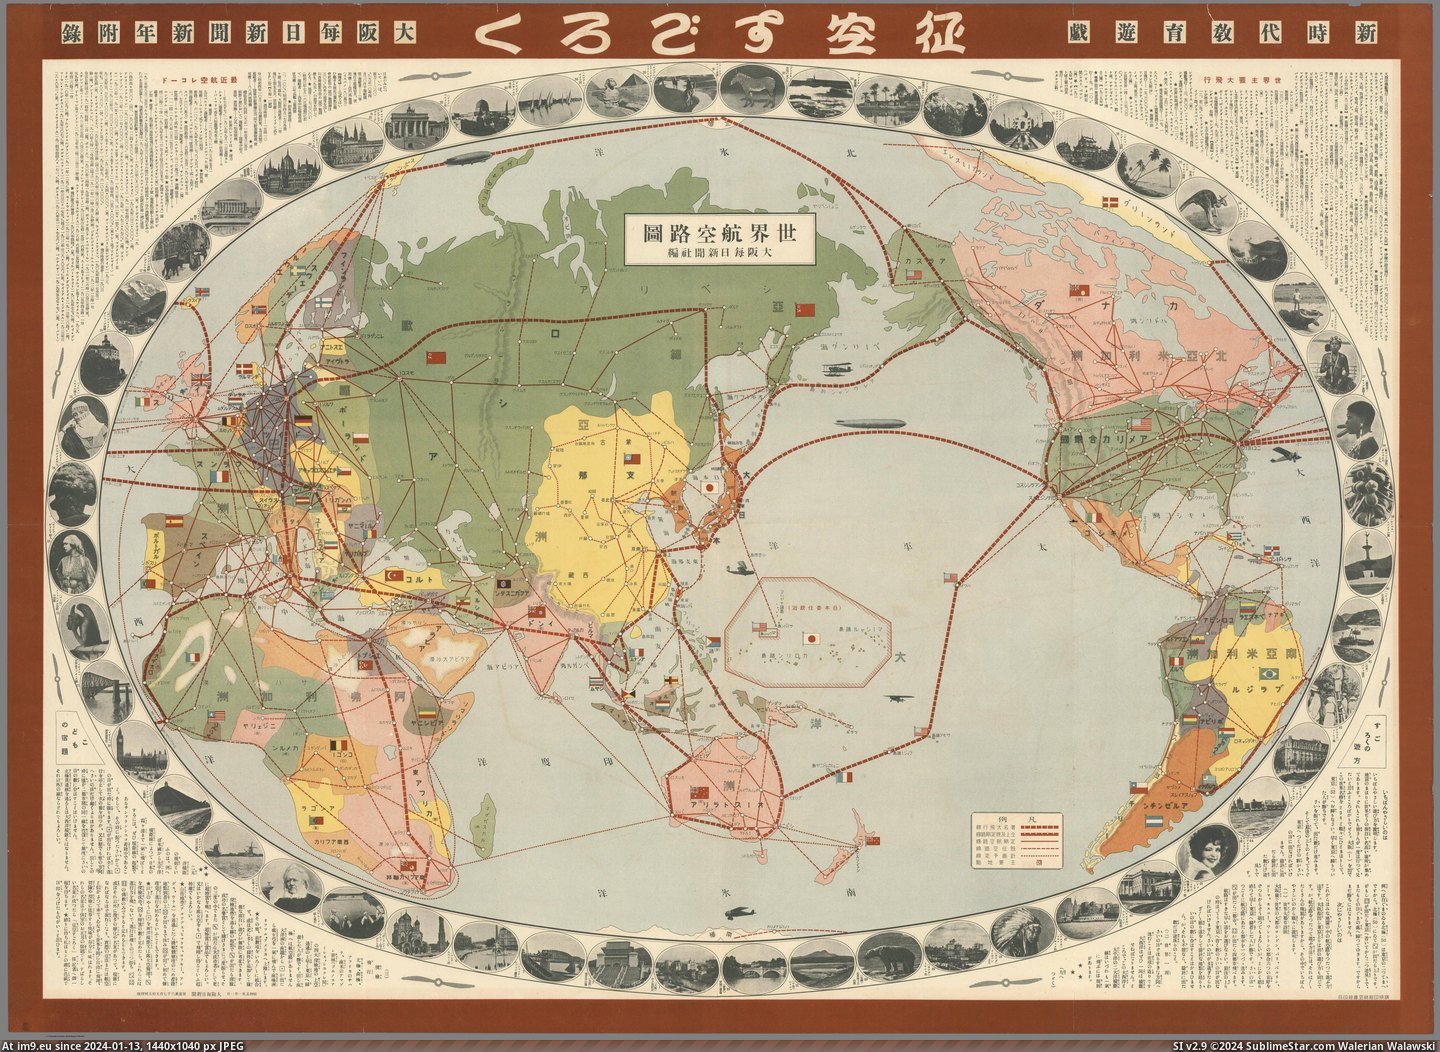 #Japanese #Game #Board #Skies #Conquering #World #Map [Mapporn] Japanese World Map from the Board Game 'Conquering the Skies'. Made in 1930 [5291x3834] Pic. (Image of album My r/MAPS favs))